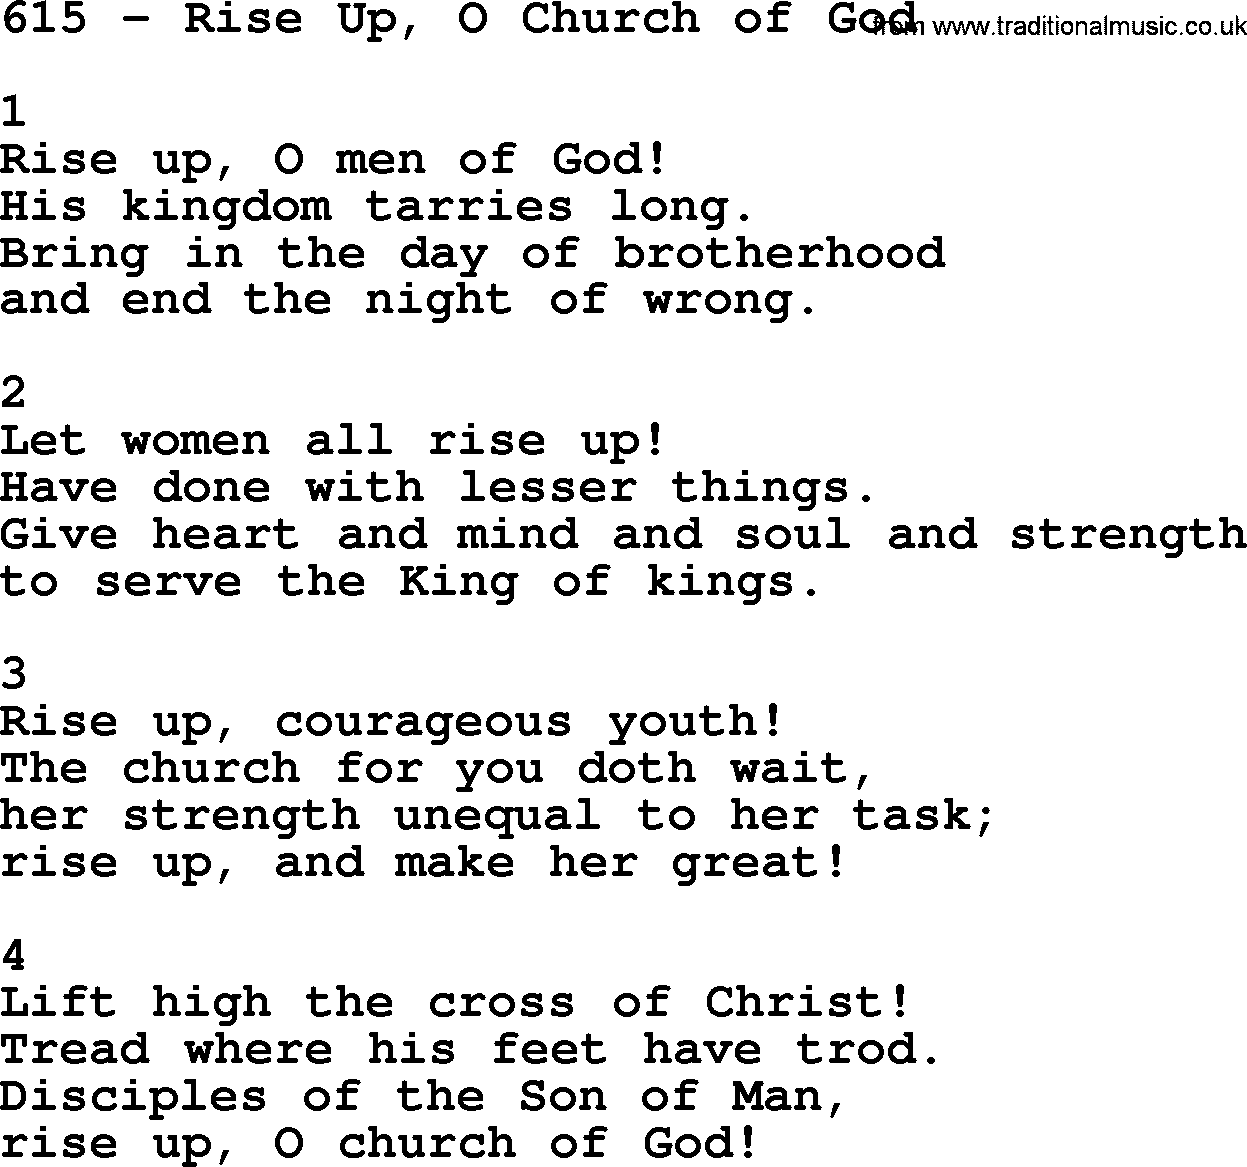 Complete Adventis Hymnal, title: 615-Rise Up, O Church Of God, with lyrics, midi, mp3, powerpoints(PPT) and PDF,